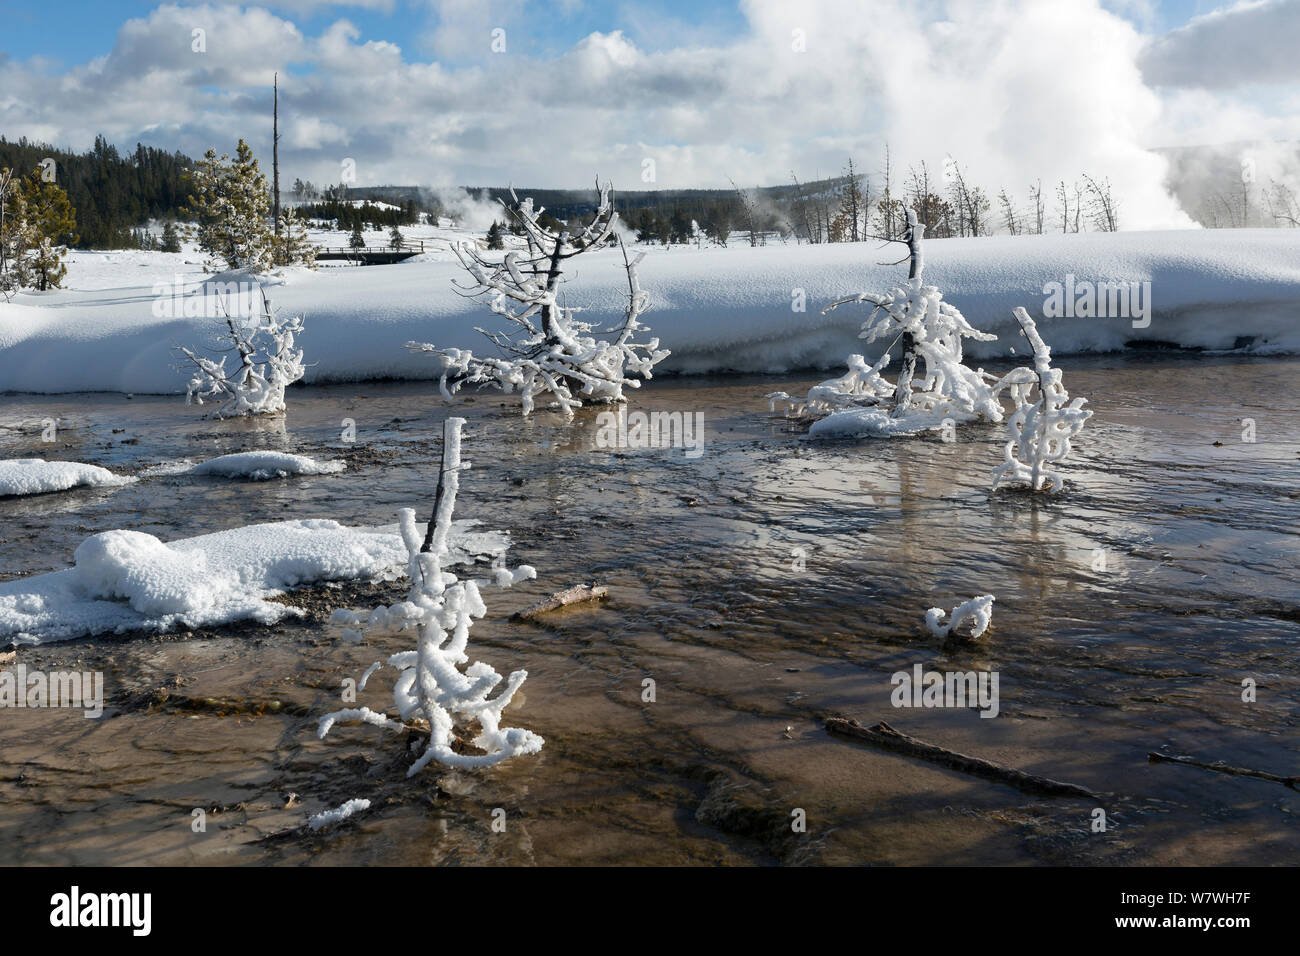 Small frost covered trees in water with ice on, Biscuit Basin, Yellowstone National Park, Wyoming, USA, February 2014. Stock Photo